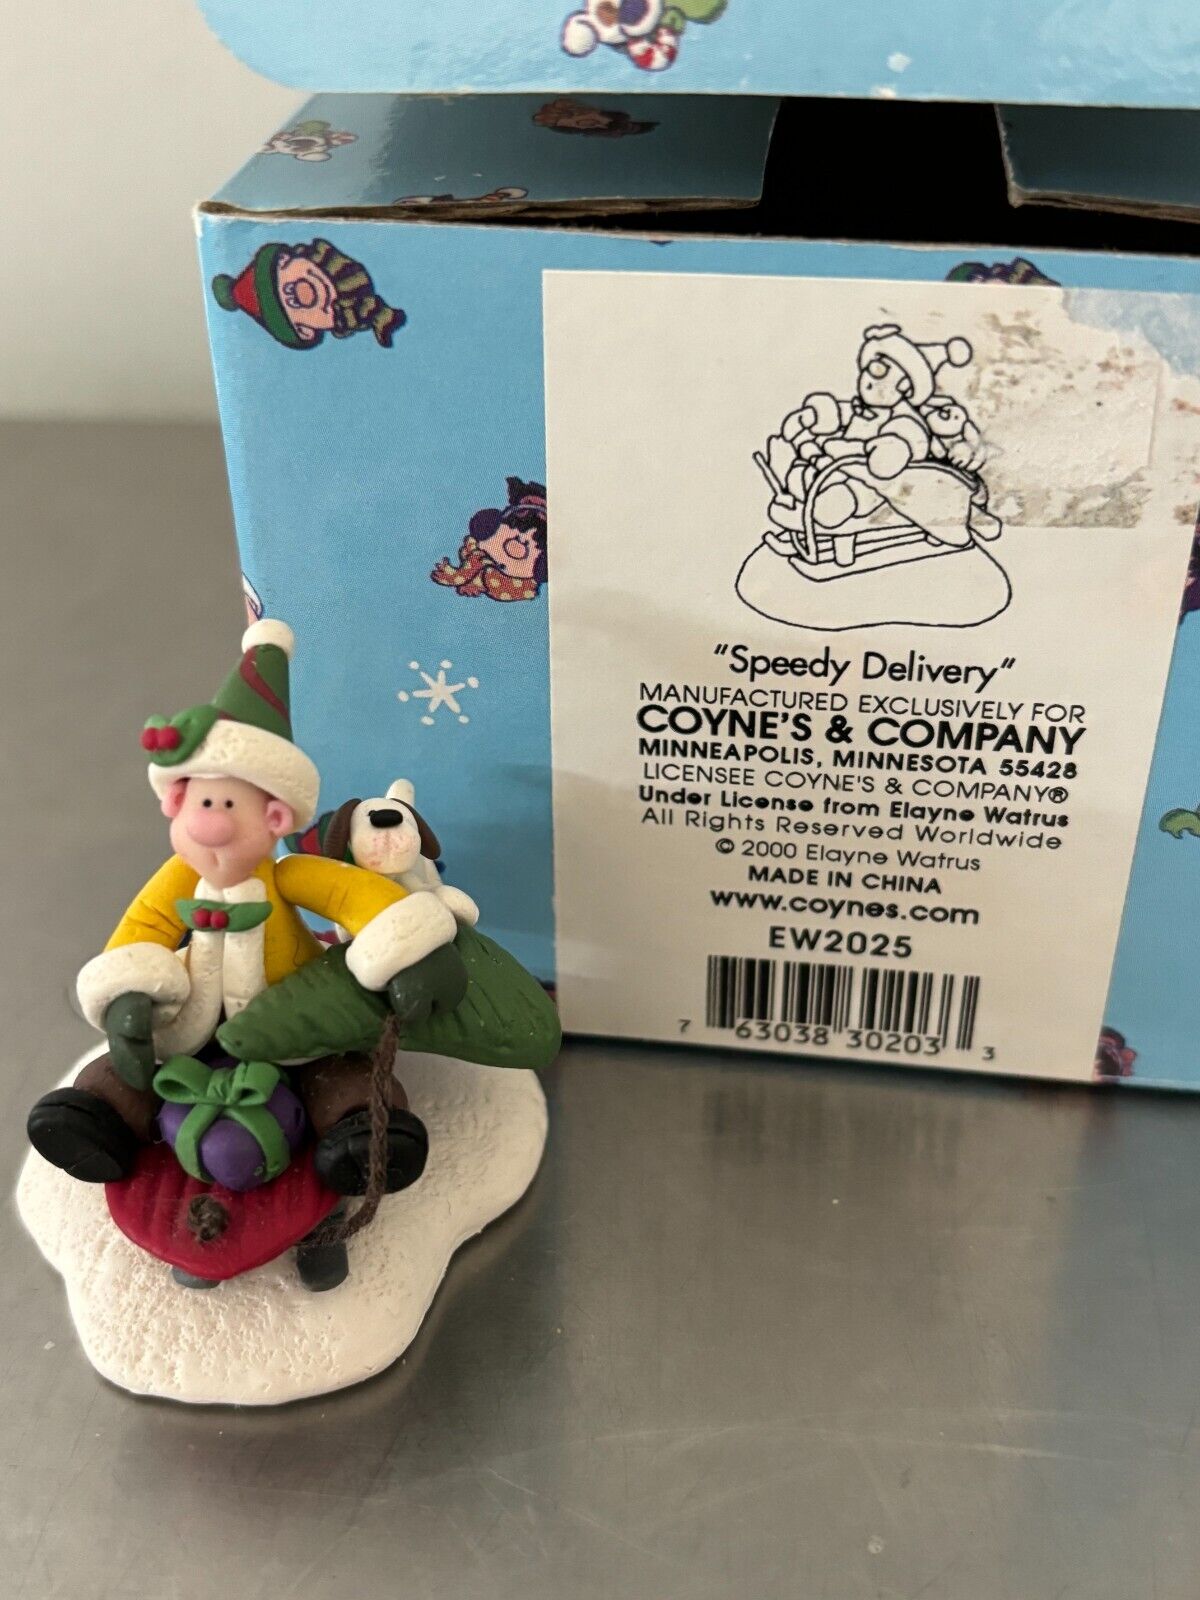 Coynes & Company SPEEDY DELIVERY Little Street Collection Christmas PIN